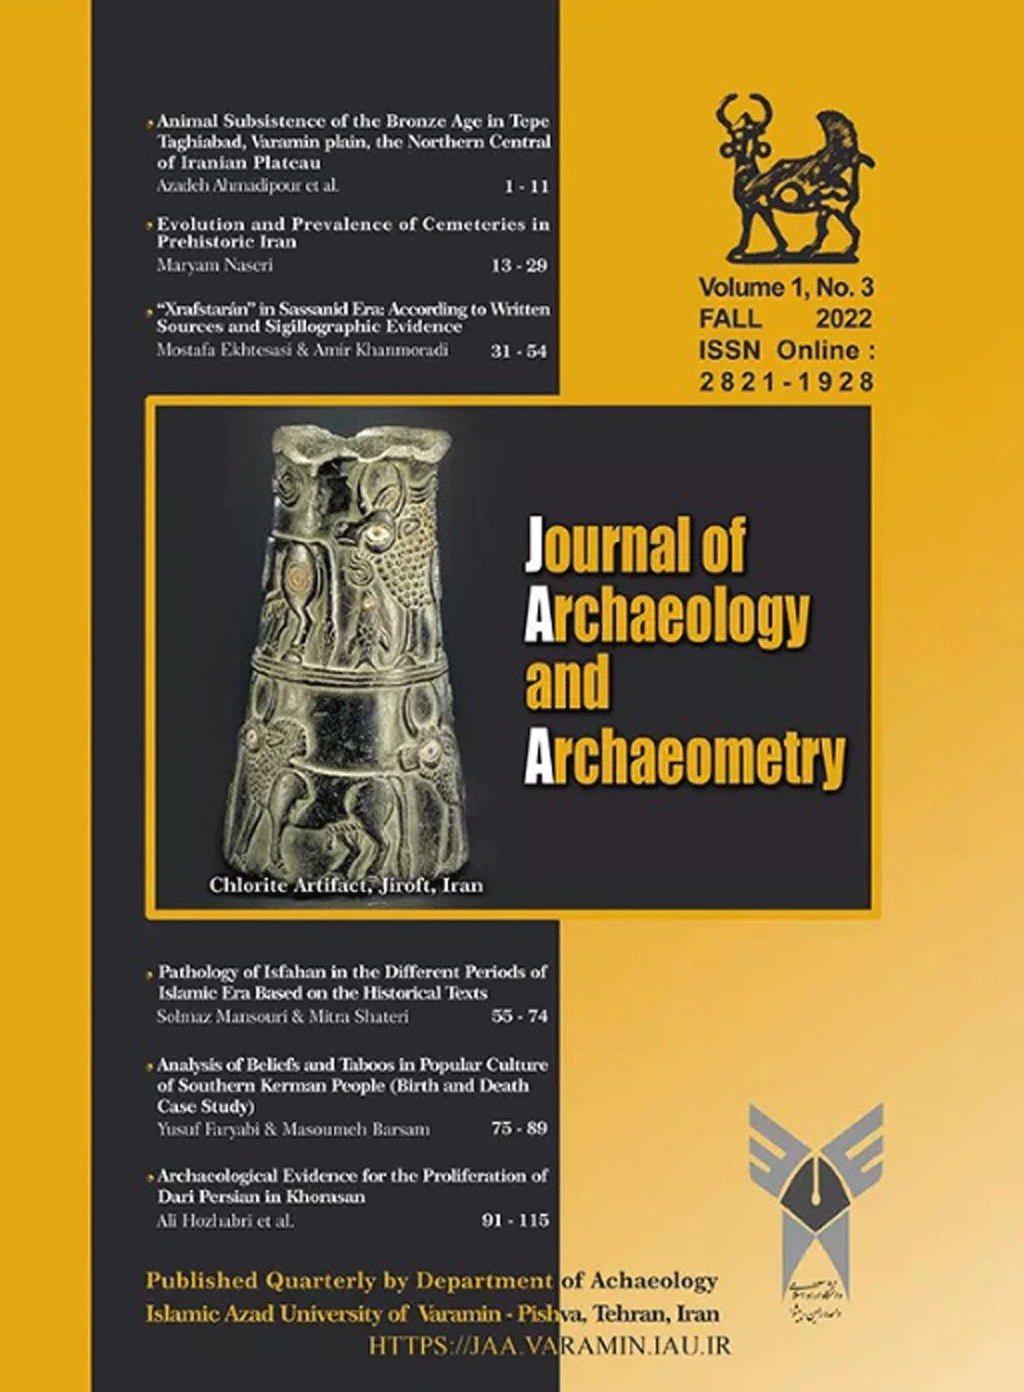 Archeology and Archaeometry - March 2023,  Volume 1 - Number 4